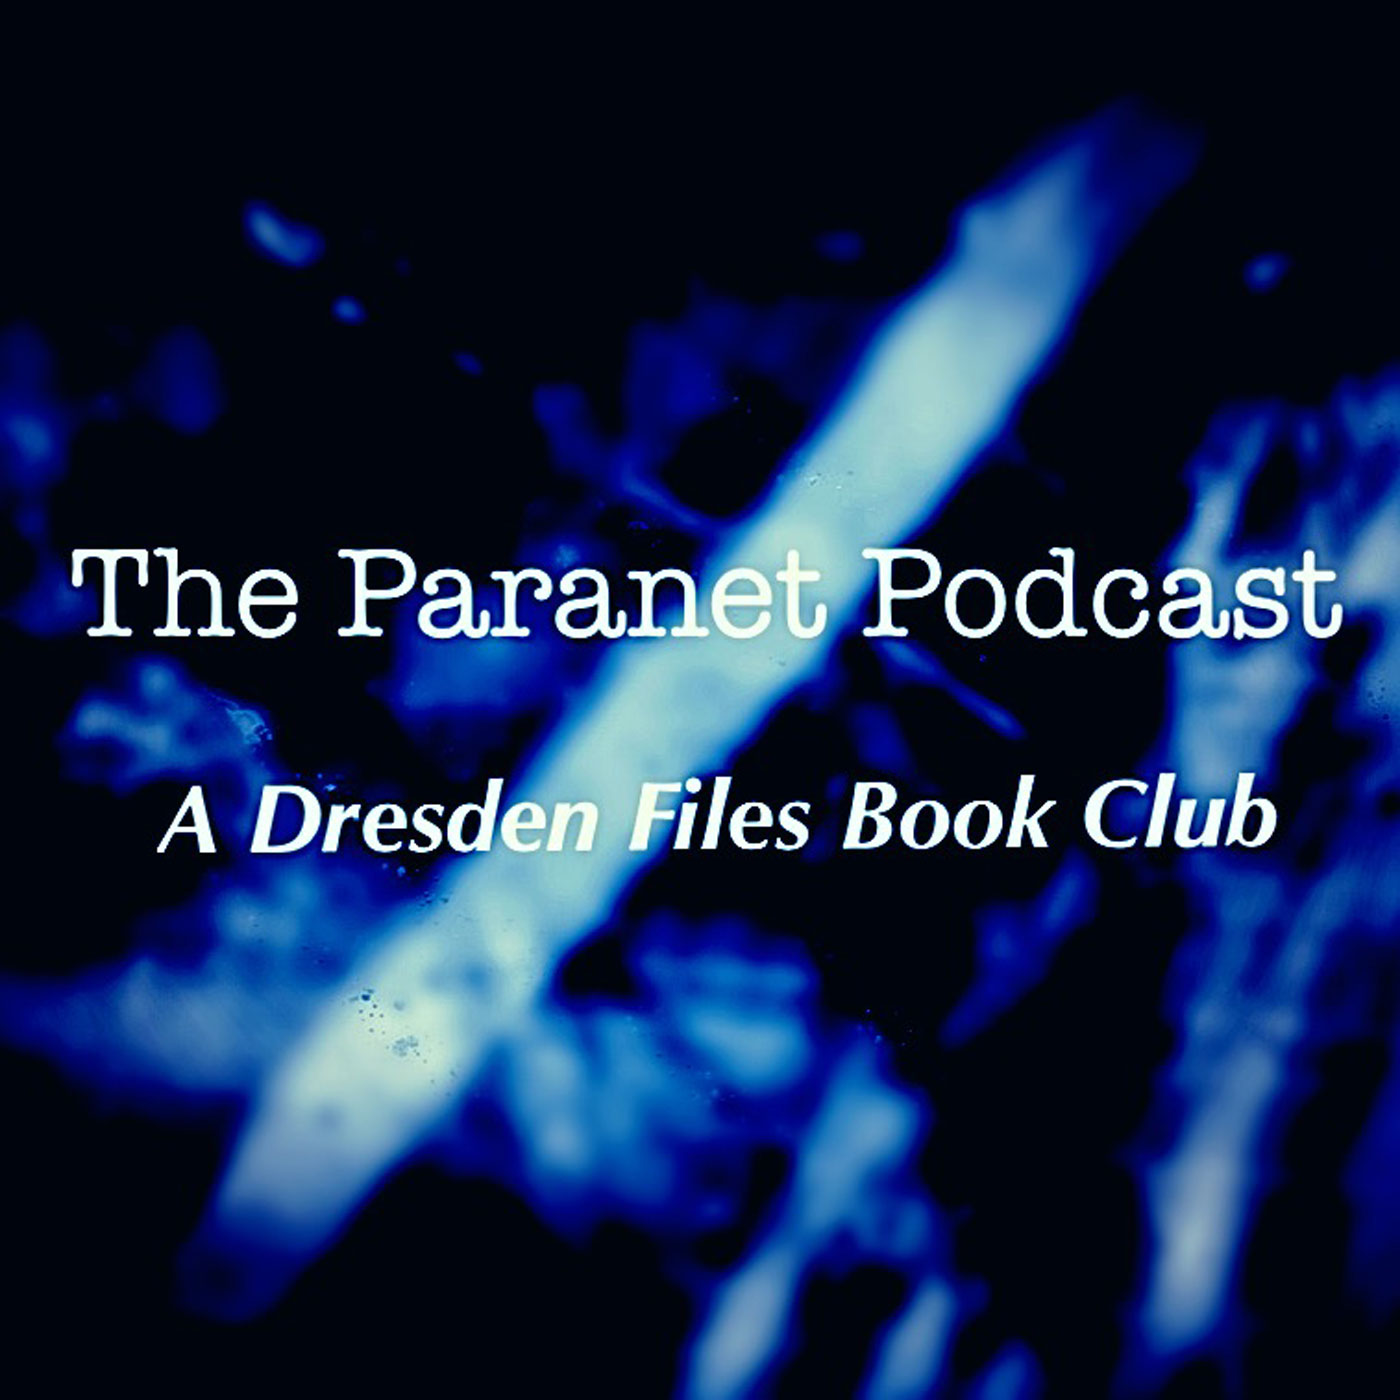 The Paranet Podcast - A Dresden Files Book Club